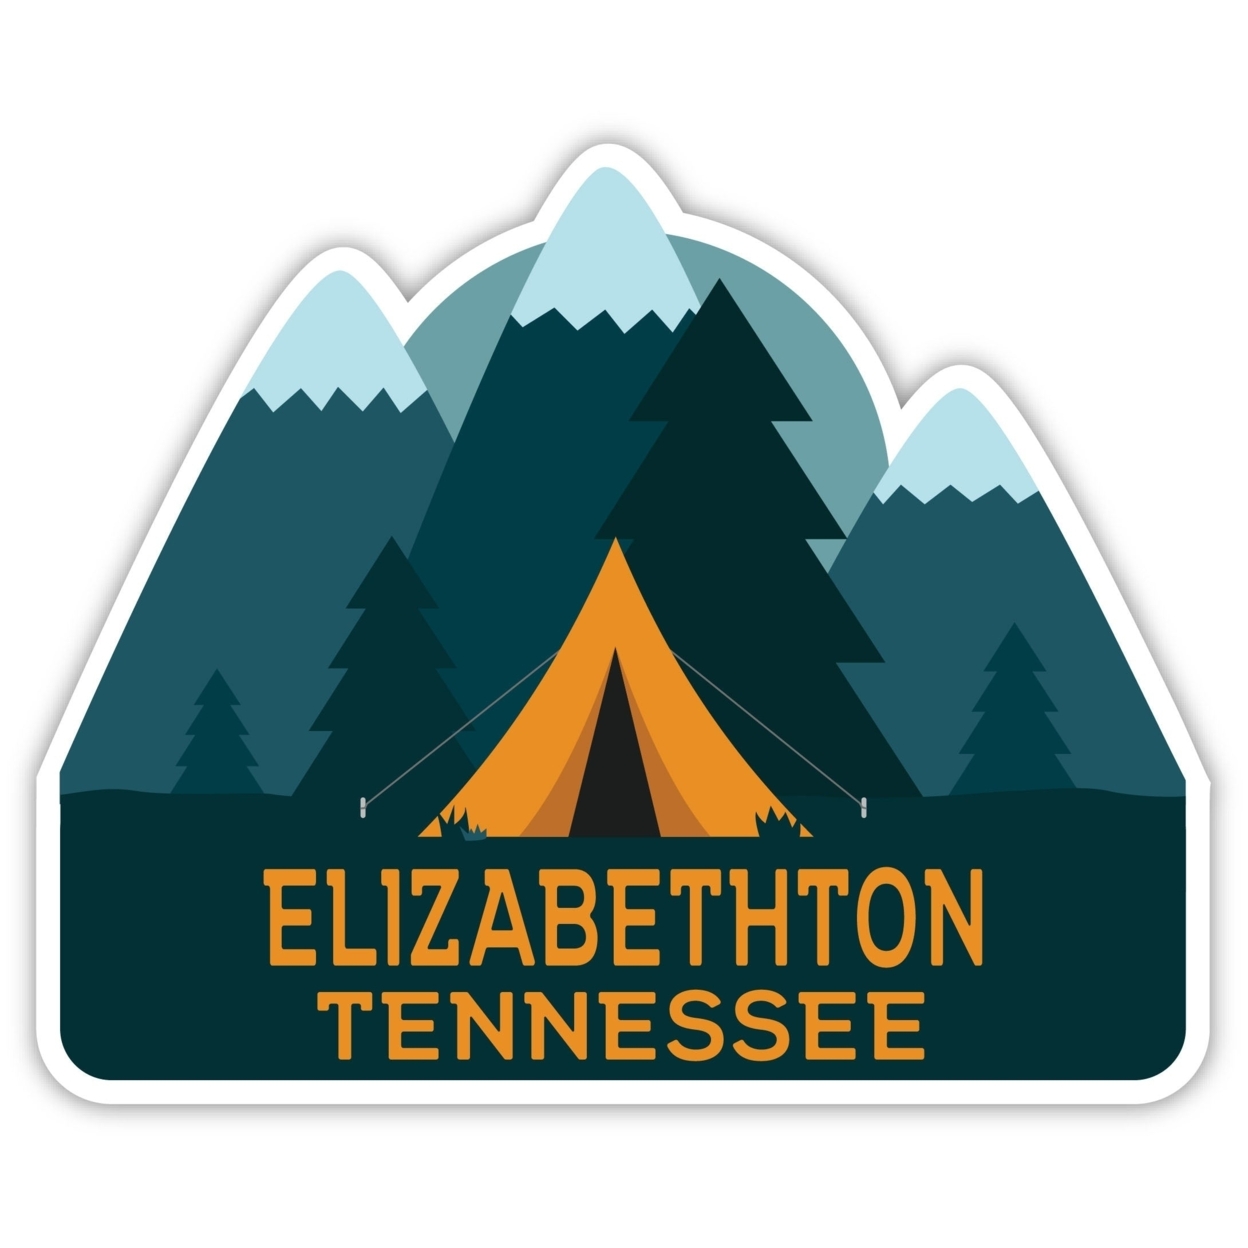 Elizabethton Tennessee Souvenir Decorative Stickers (Choose Theme And Size) - 4-Pack, 4-Inch, Bear